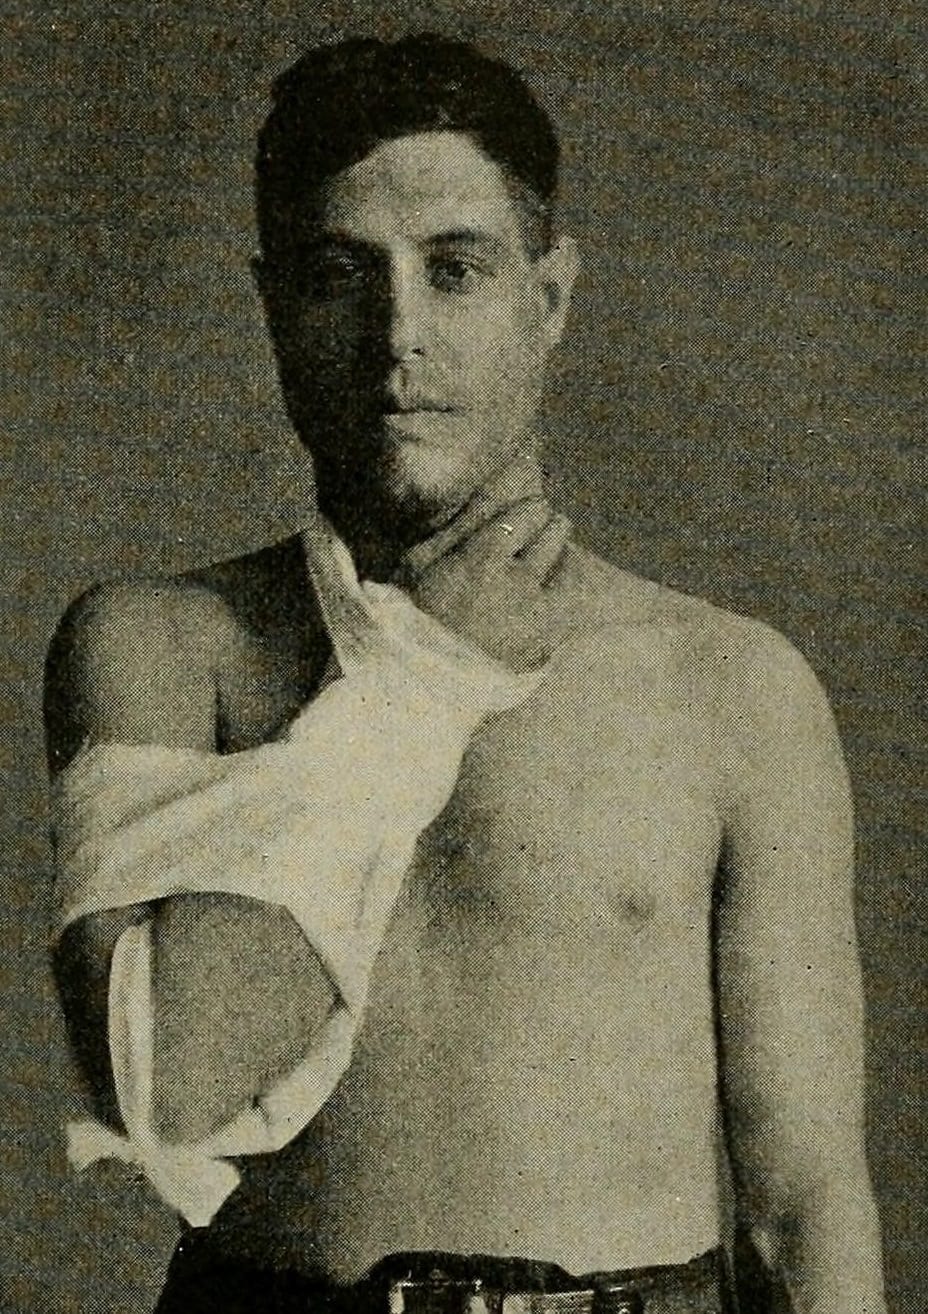 Man with his arm in splint to treat elbow fracture